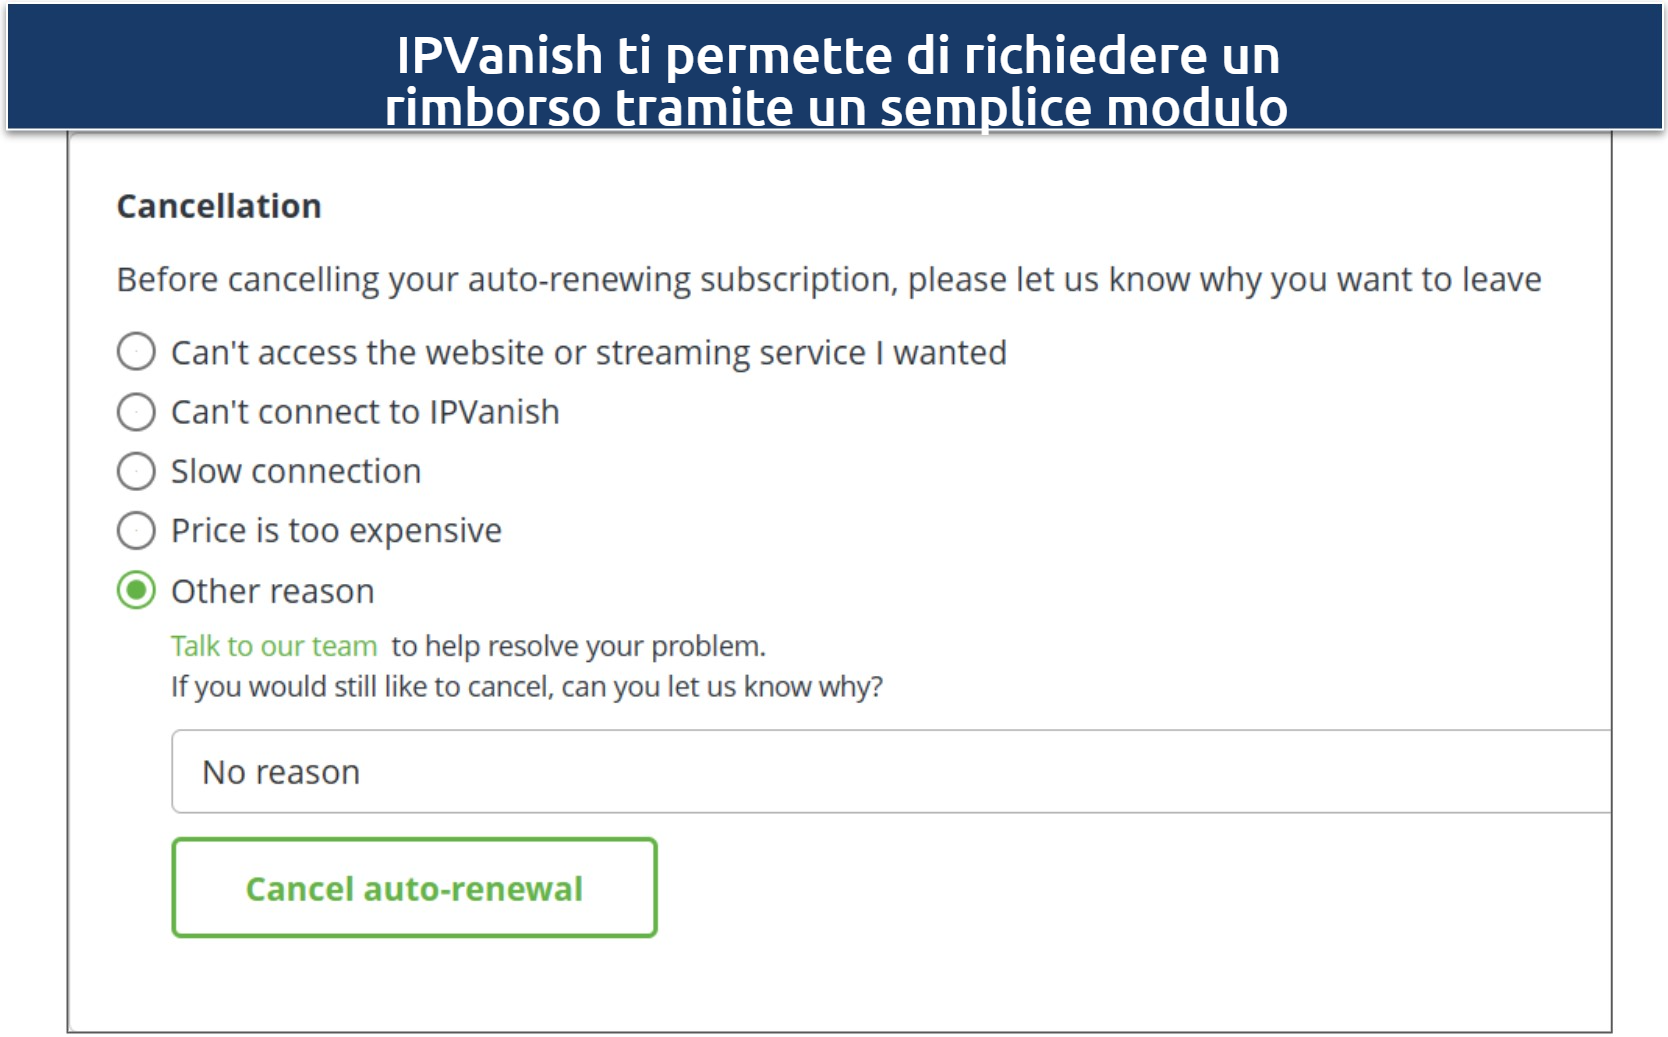 Initiating a refund through the account settings on IPVanish's website